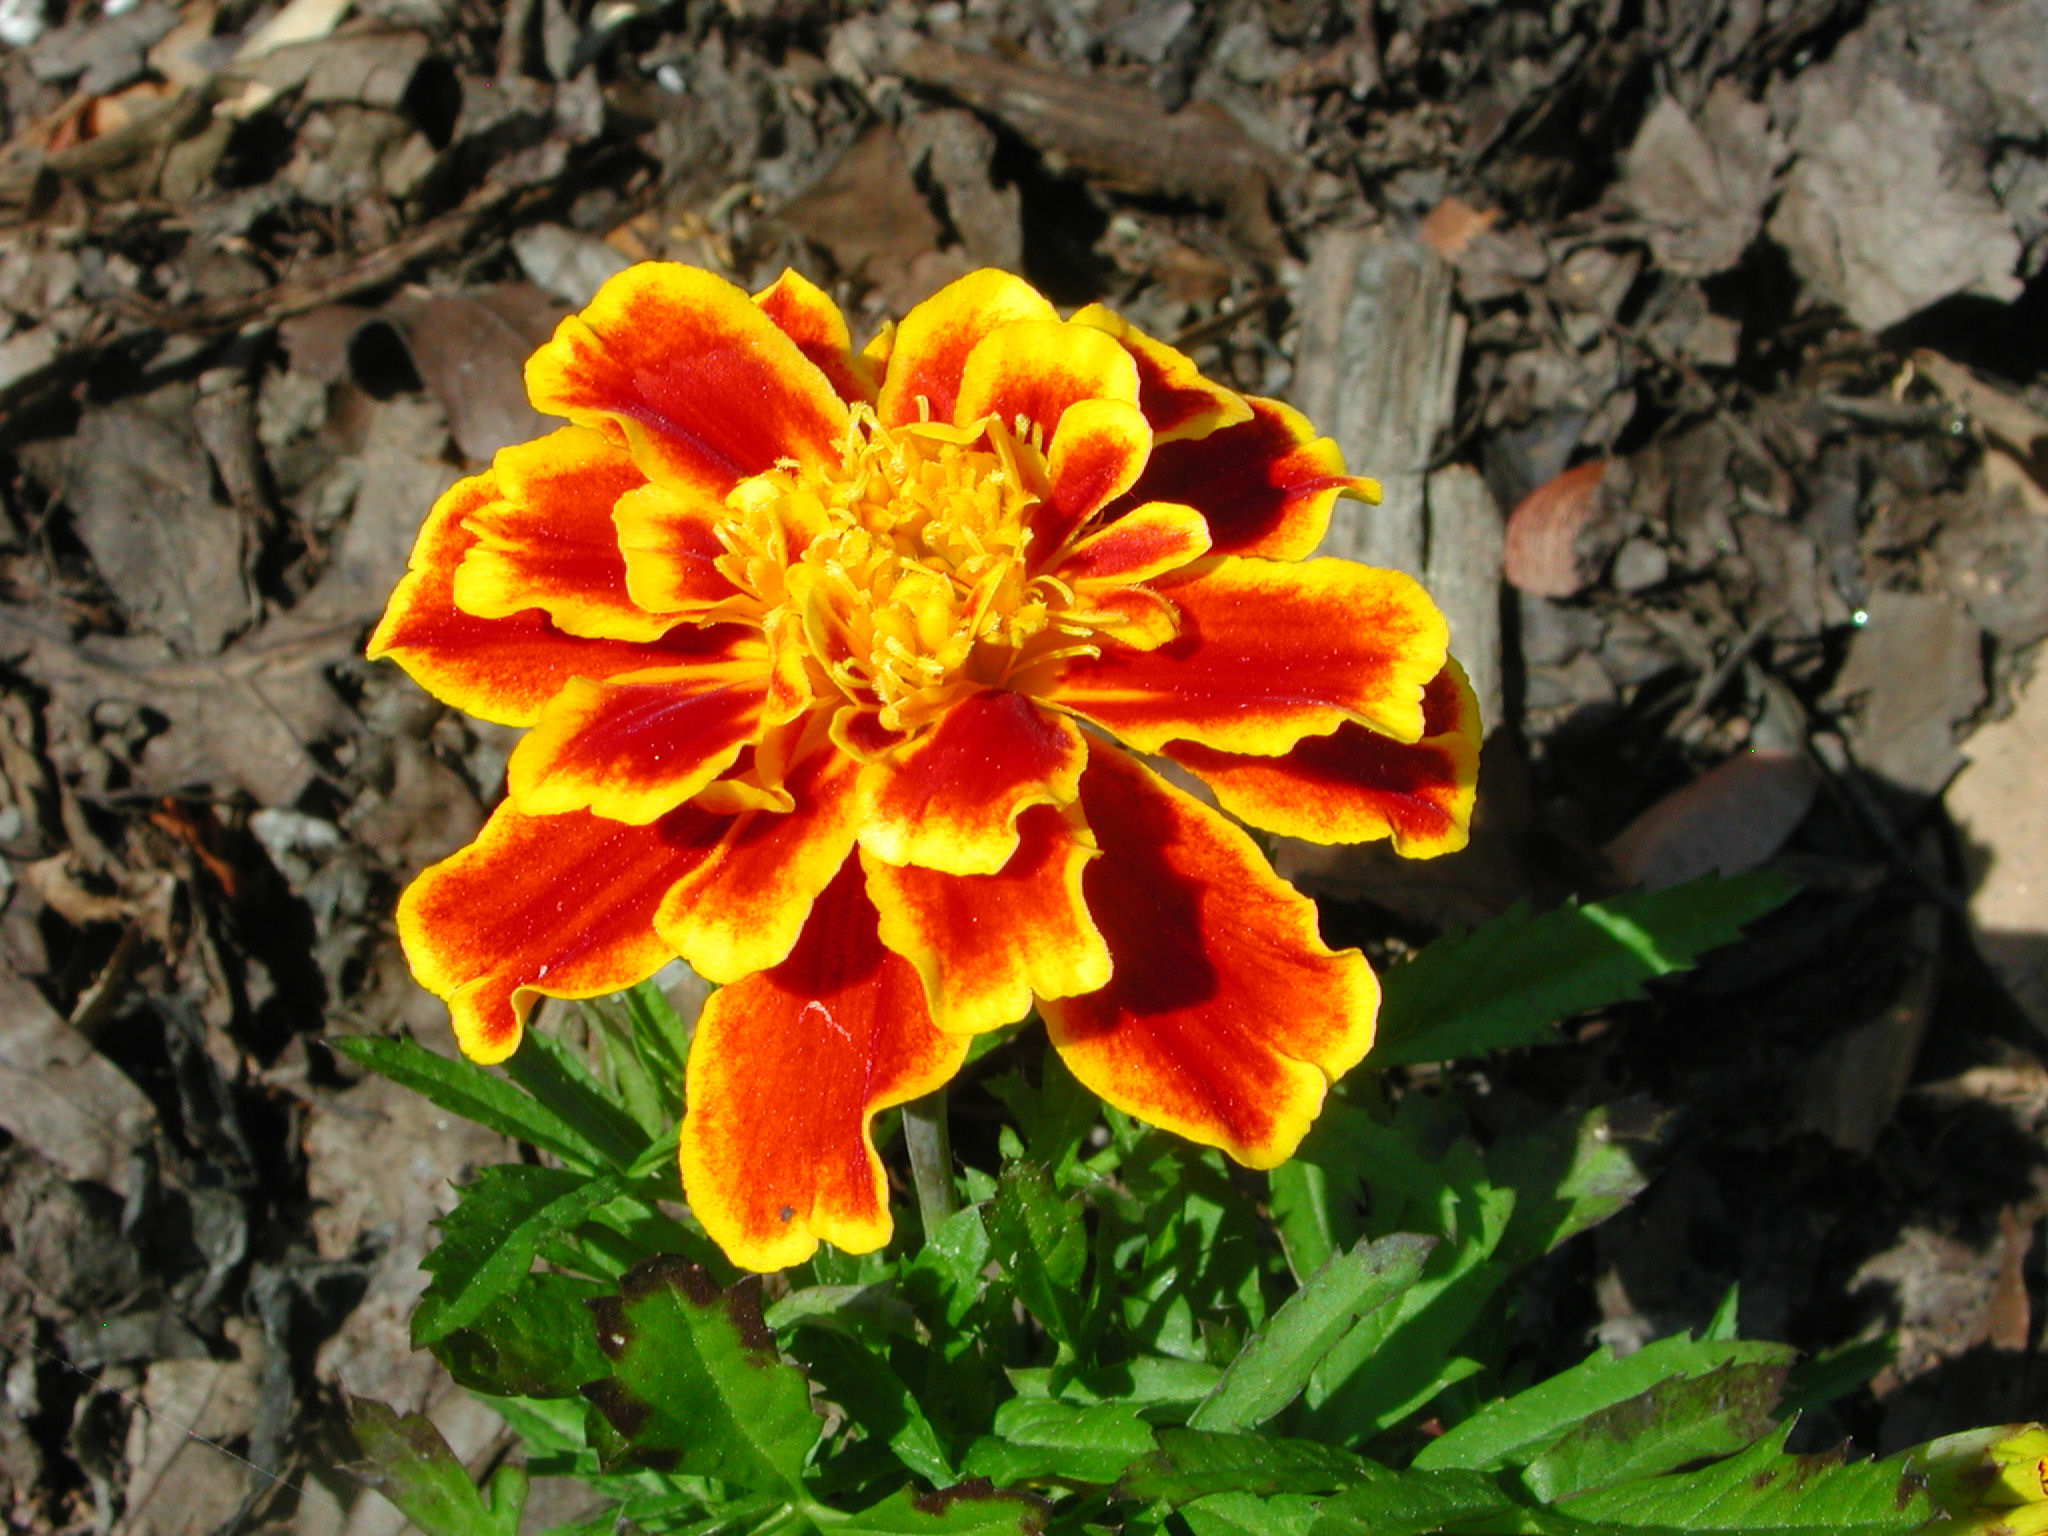 Flower of French Marigold Nature Photo Gallery